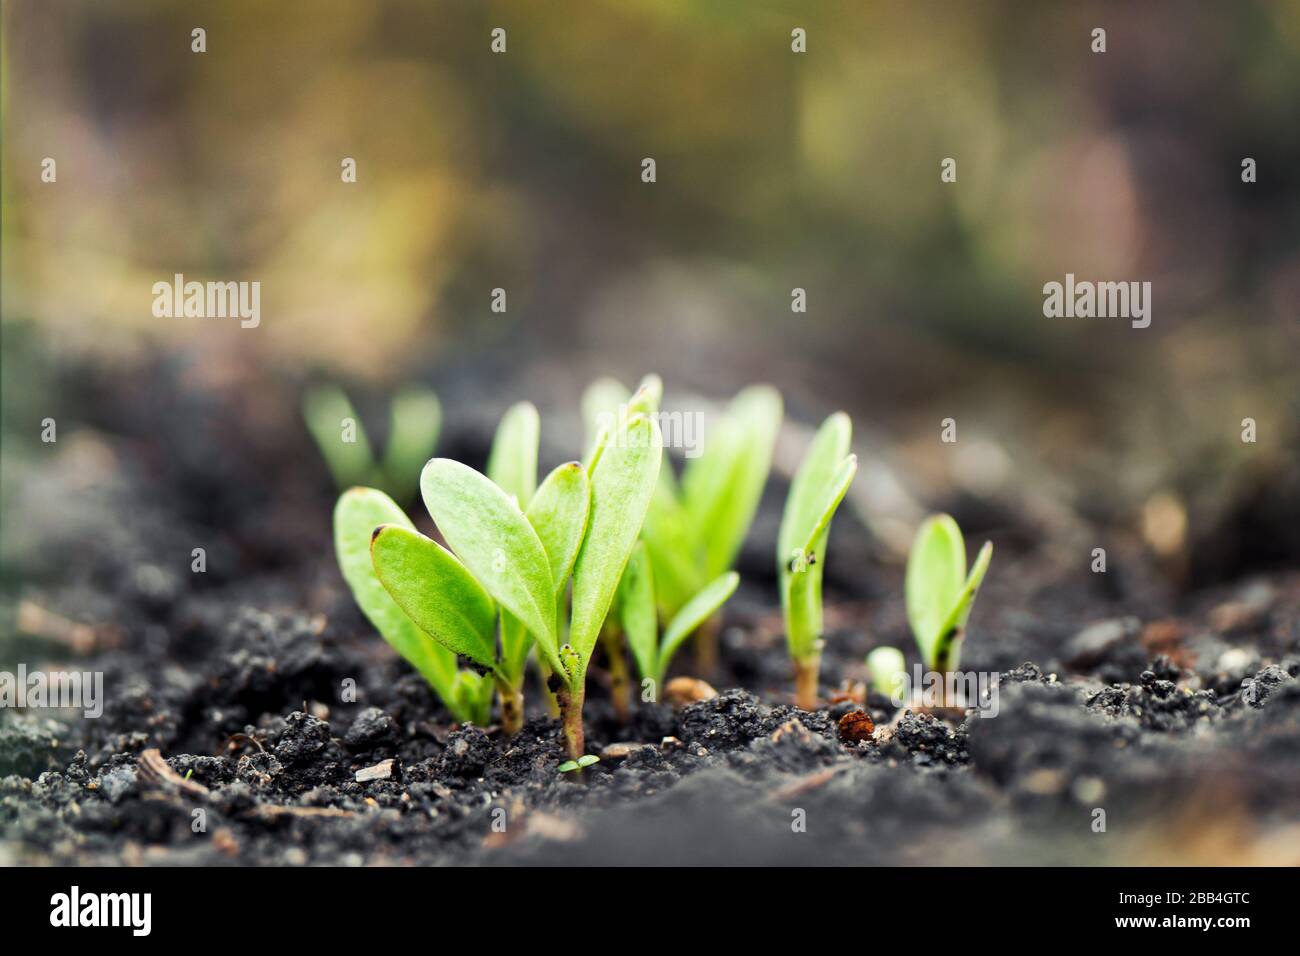 Sprouted plants growth in the soil, close up Stock Photo